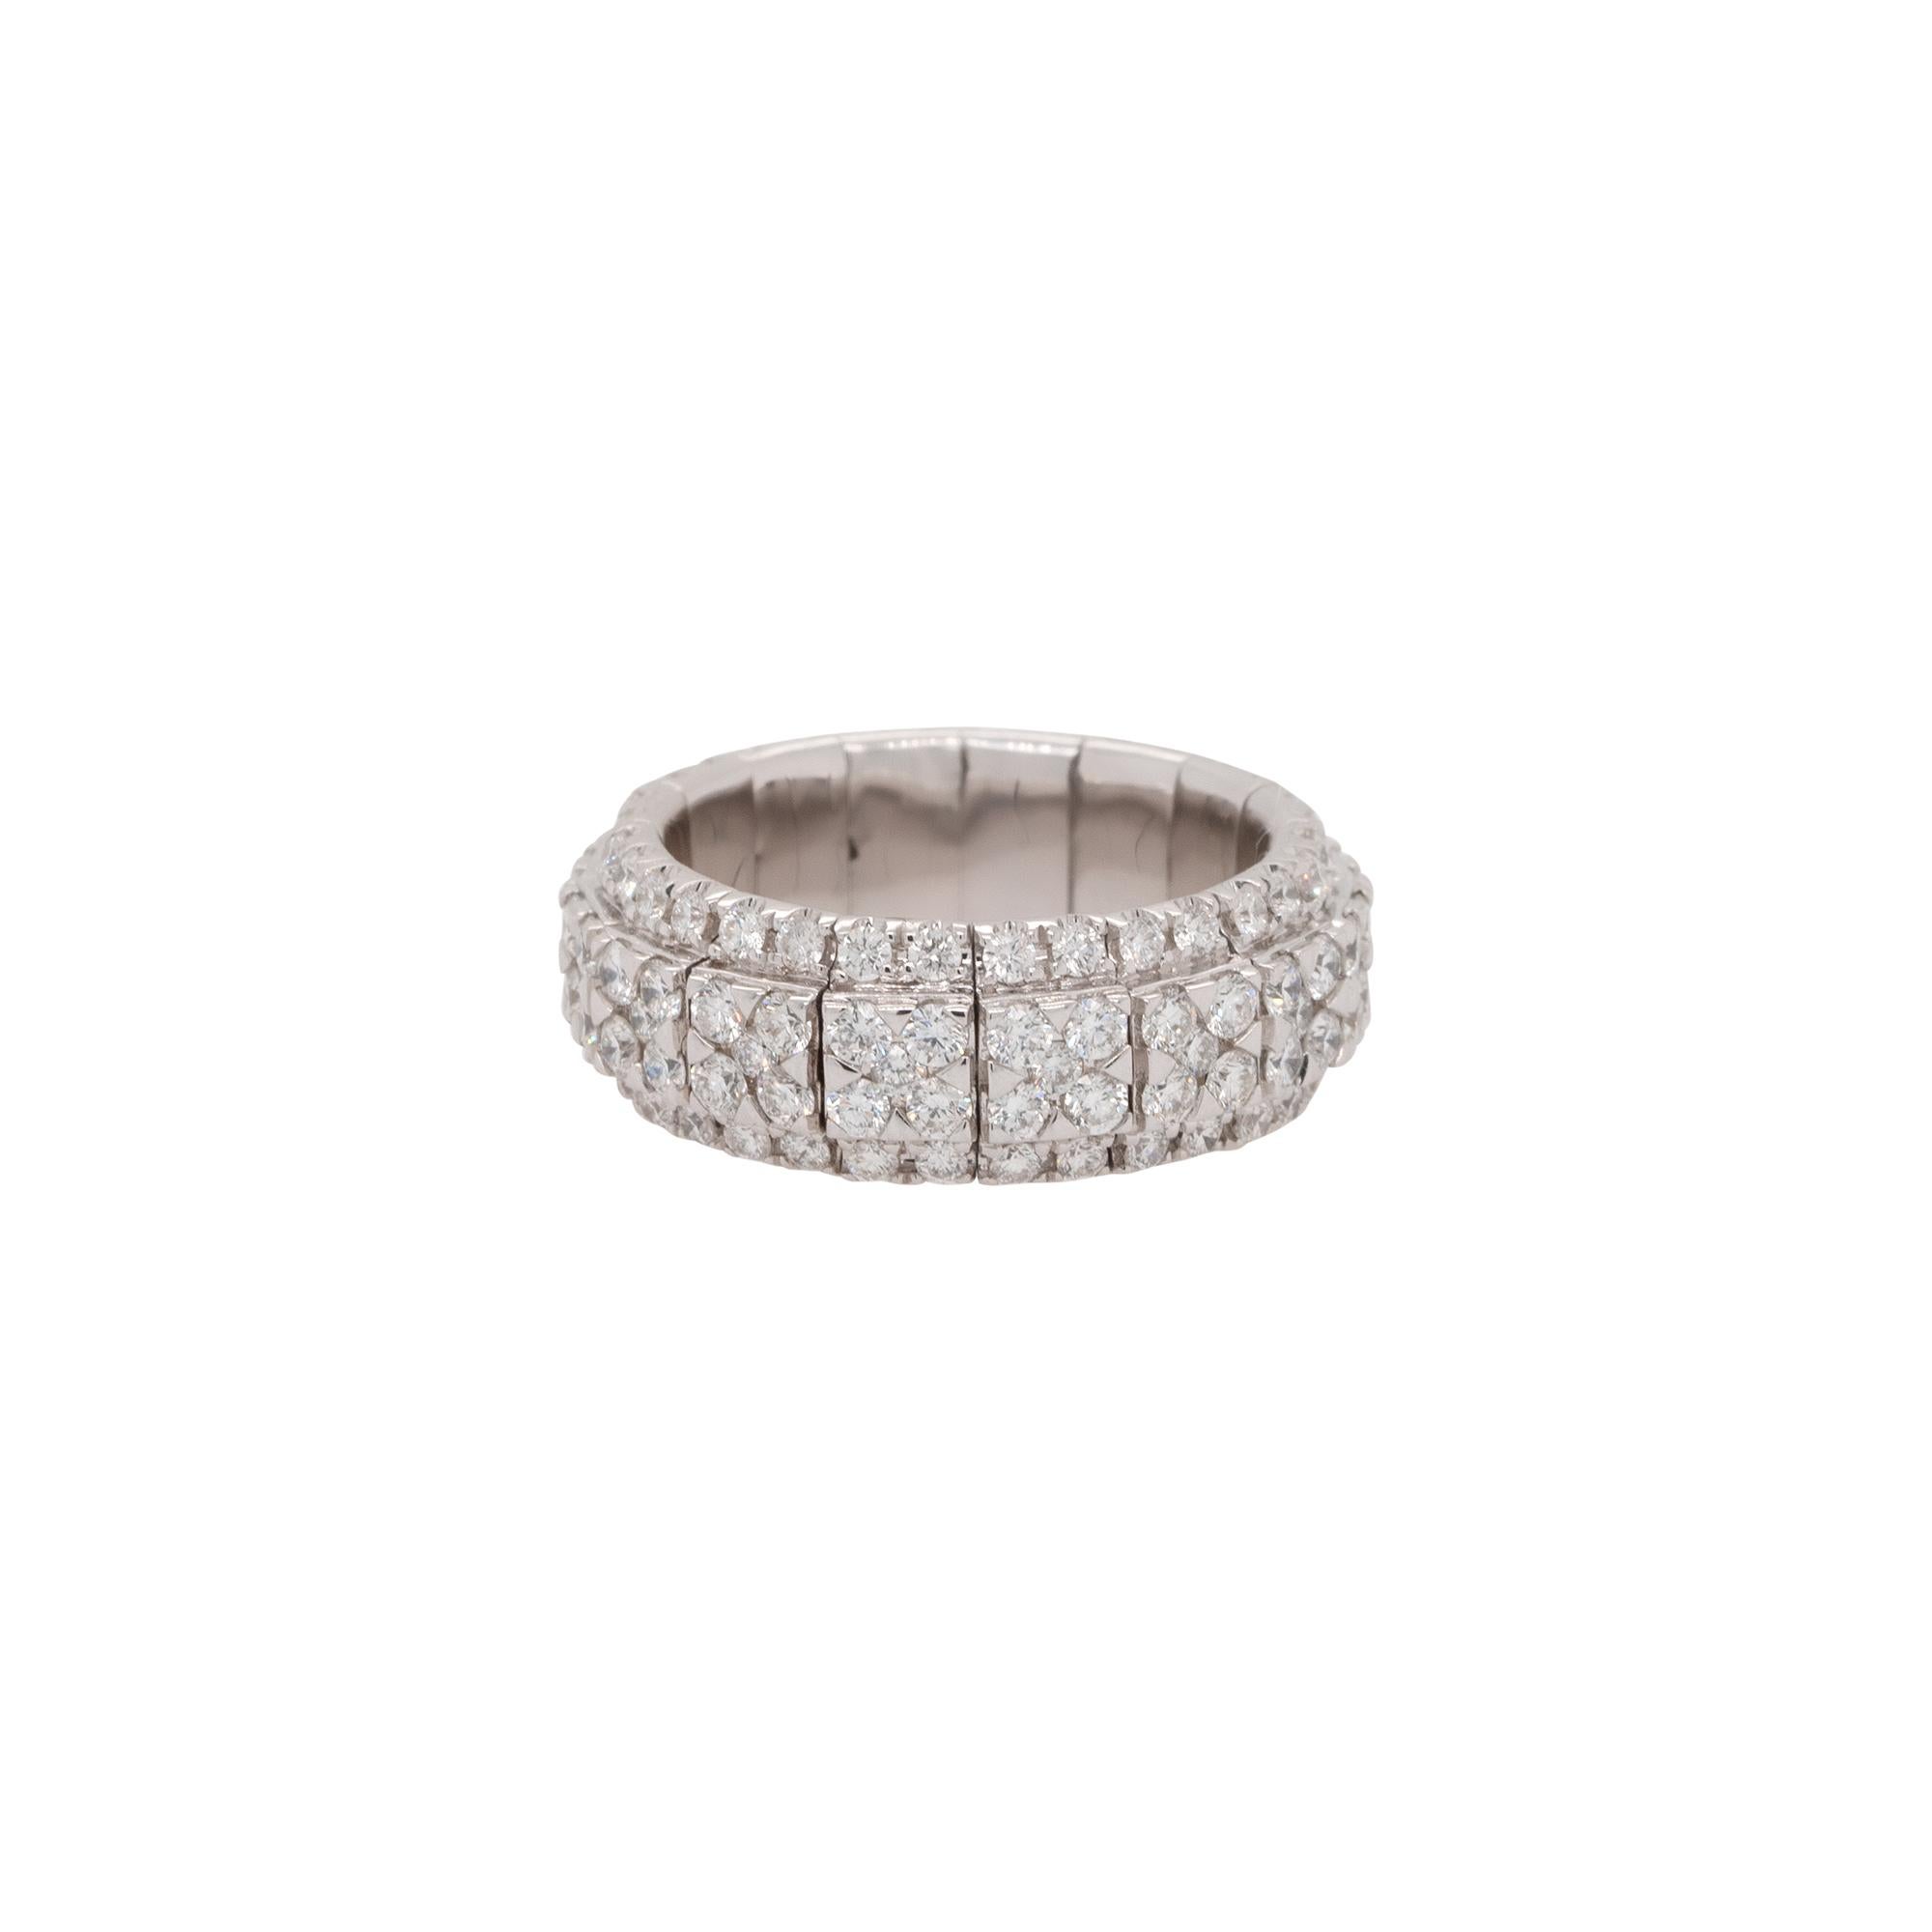 Material: 18k white gold
Diamond Details: Approximately 2.59ctw of Round Diamonds. Diamonds are G/H in color and VS in clarity.
Item Weight: 9.1g (5.9dwt)
Ring Measurement: Ring Size 6.5-7.5 
Additional Detail: This item comes with a  presentation